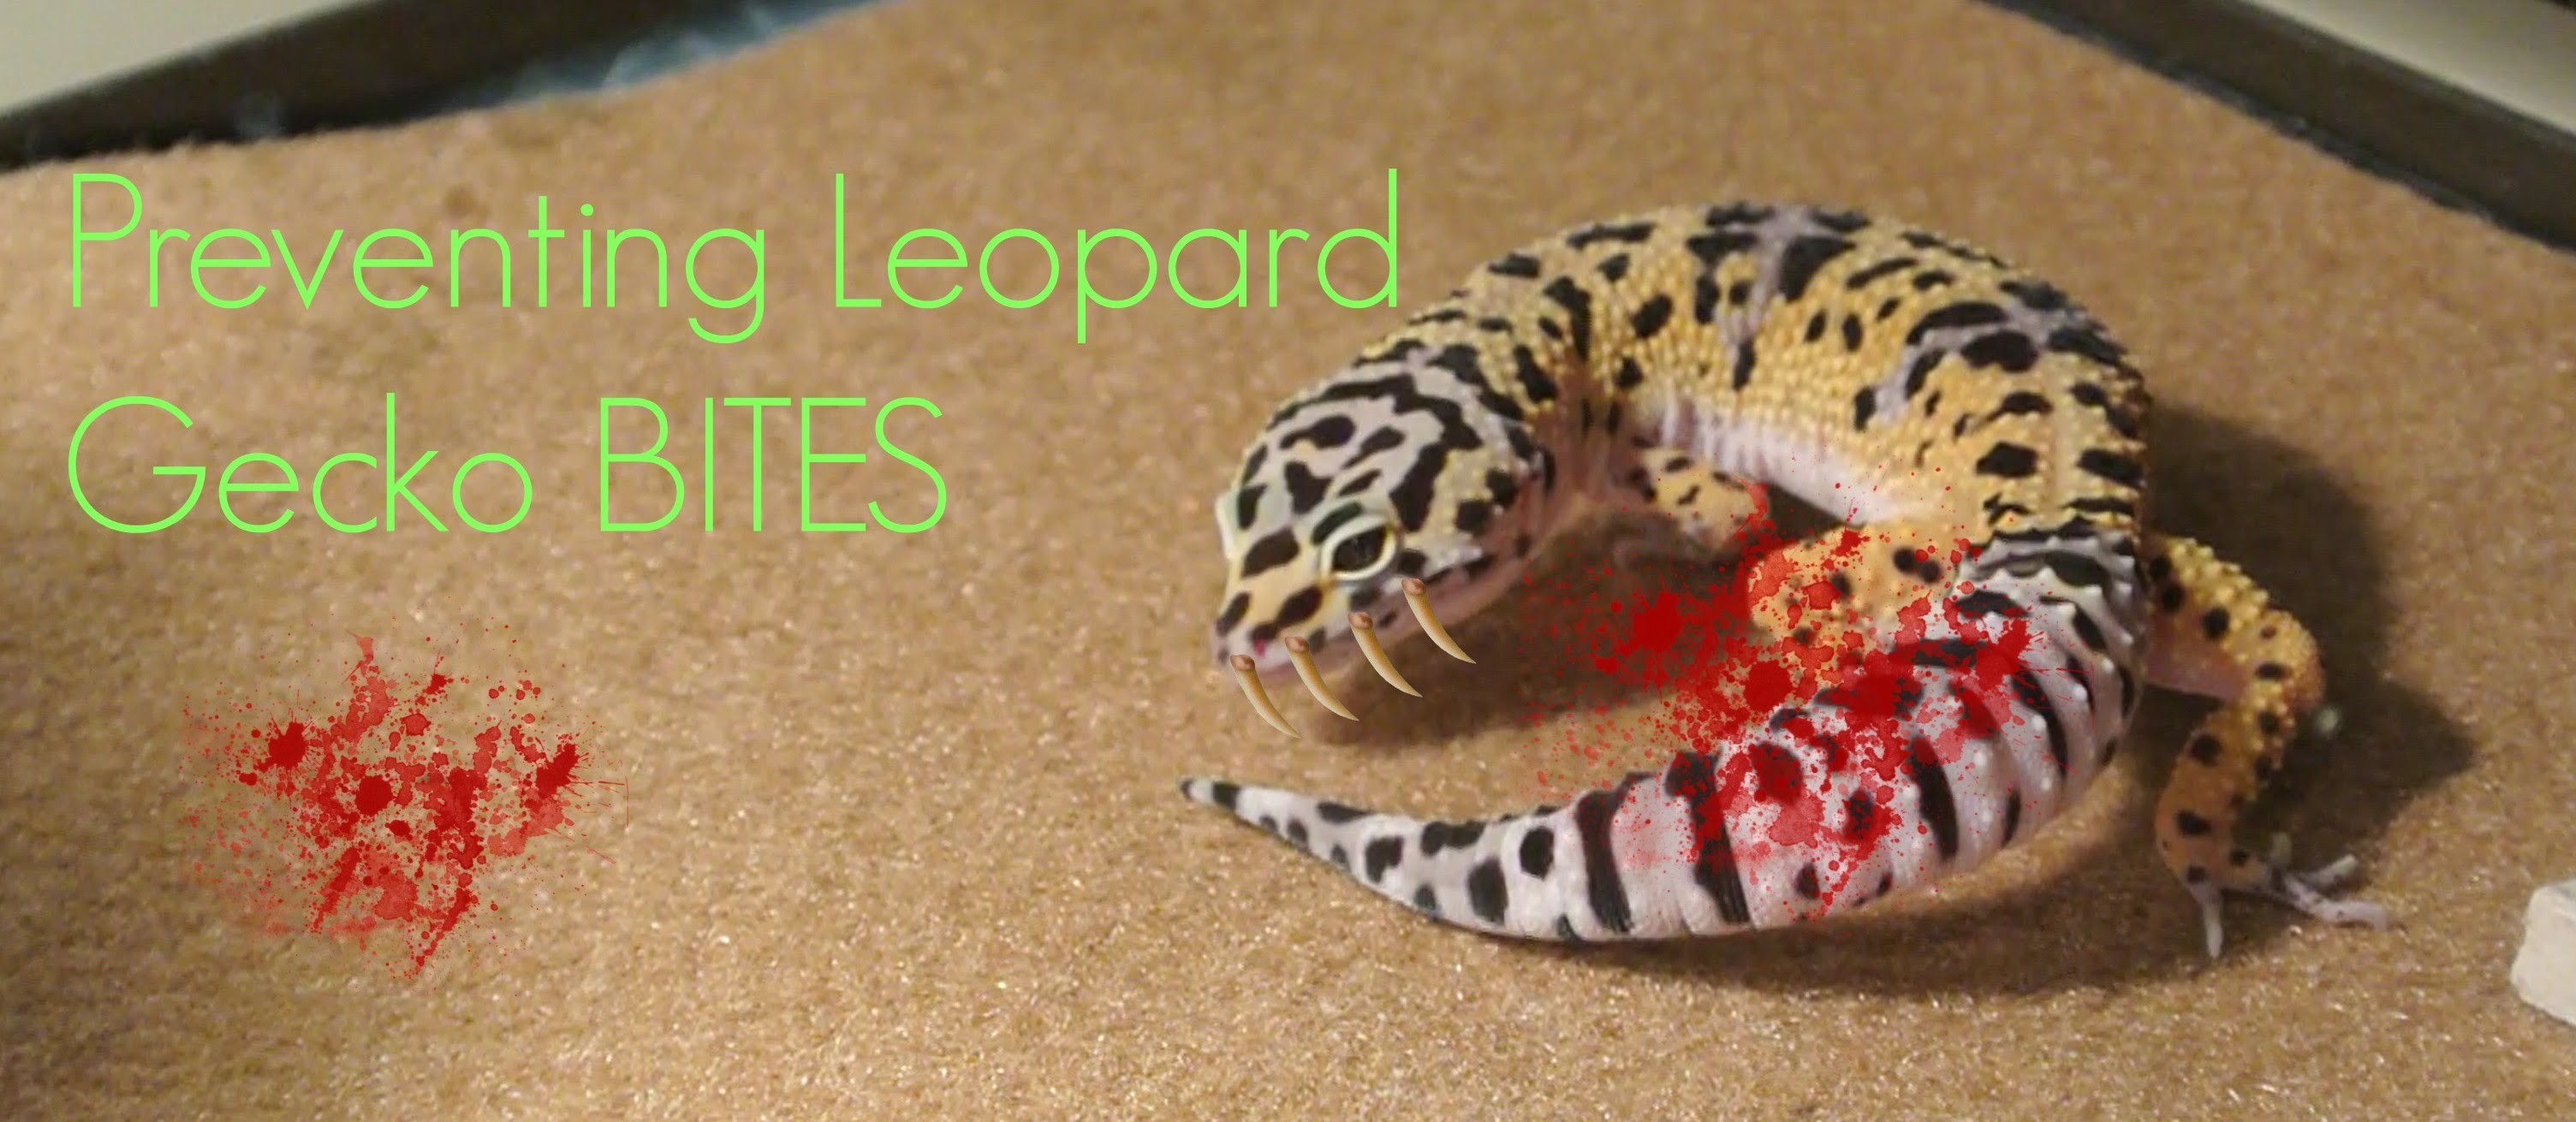 3009x1311 Amazing Leopard Gecko Pictures & Backgrounds